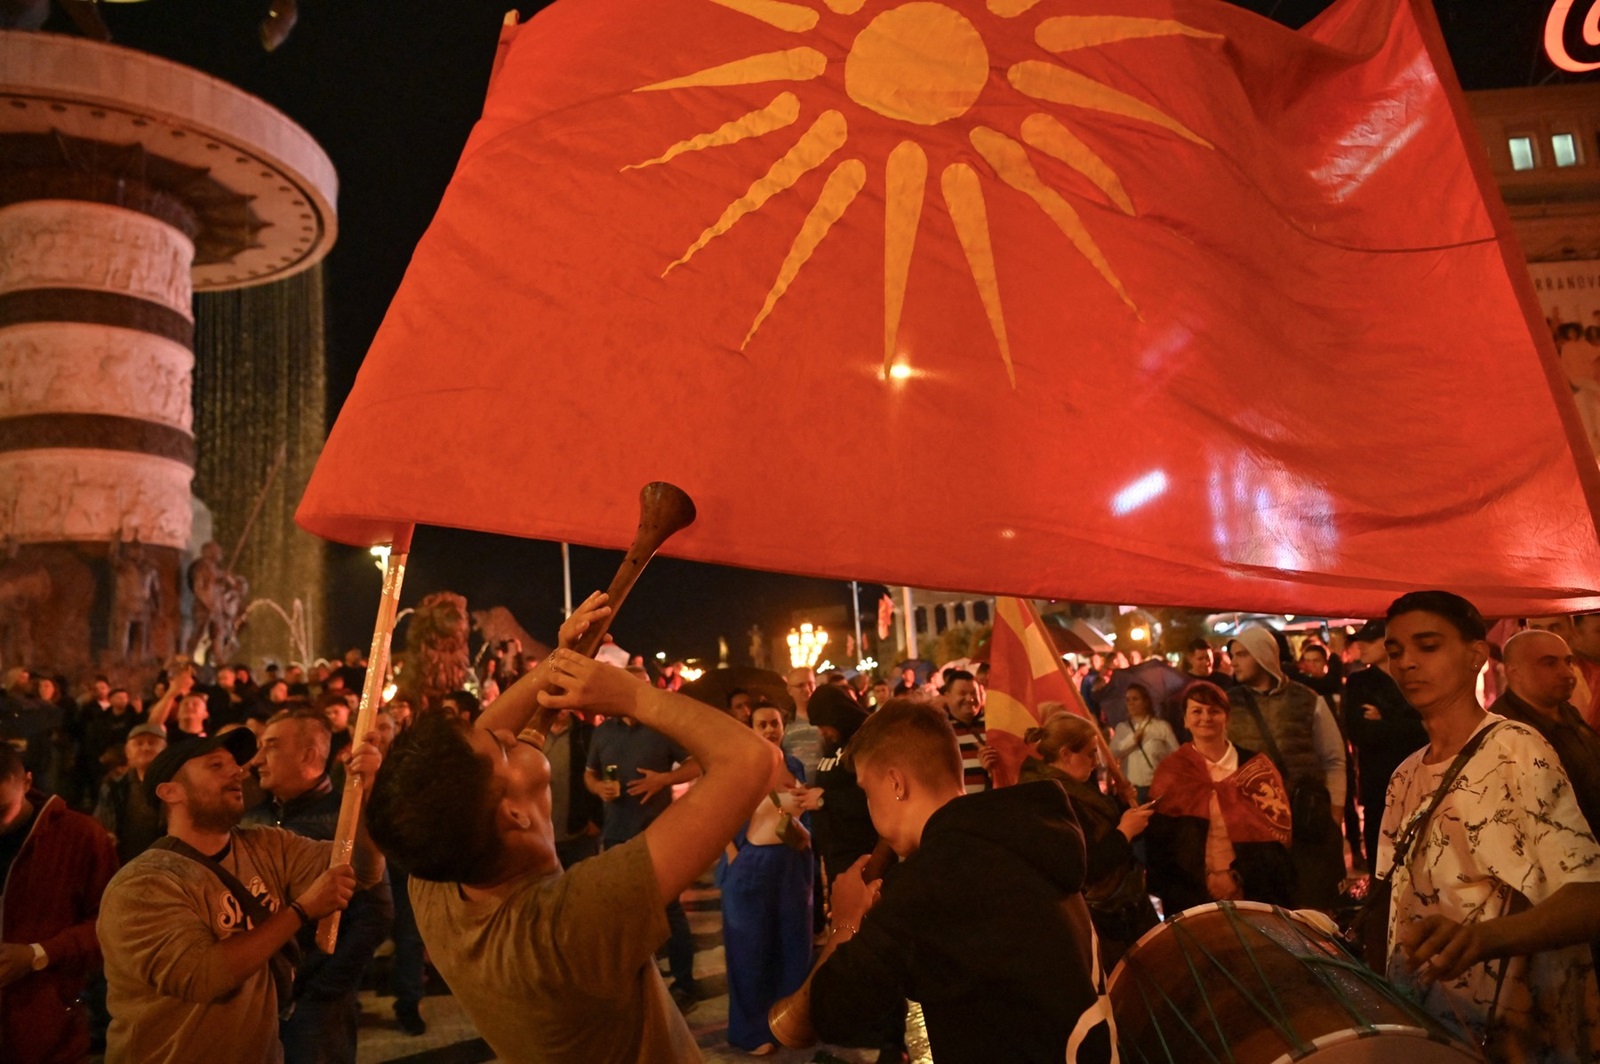 Supporters of the North Macedonian opposition party VMRO-DPMNE celebrate their party's victory in Skopje on May 8, 2024. North Macedonia appeared to be on a collision course with its EU neighbours Greece and Bulgaria, as the nationalist opposition swept parliamentary and presidential elections.,Image: 871291319, License: Rights-managed, Restrictions: , Model Release: no, Credit line: Armend NIMANI / AFP / Profimedia